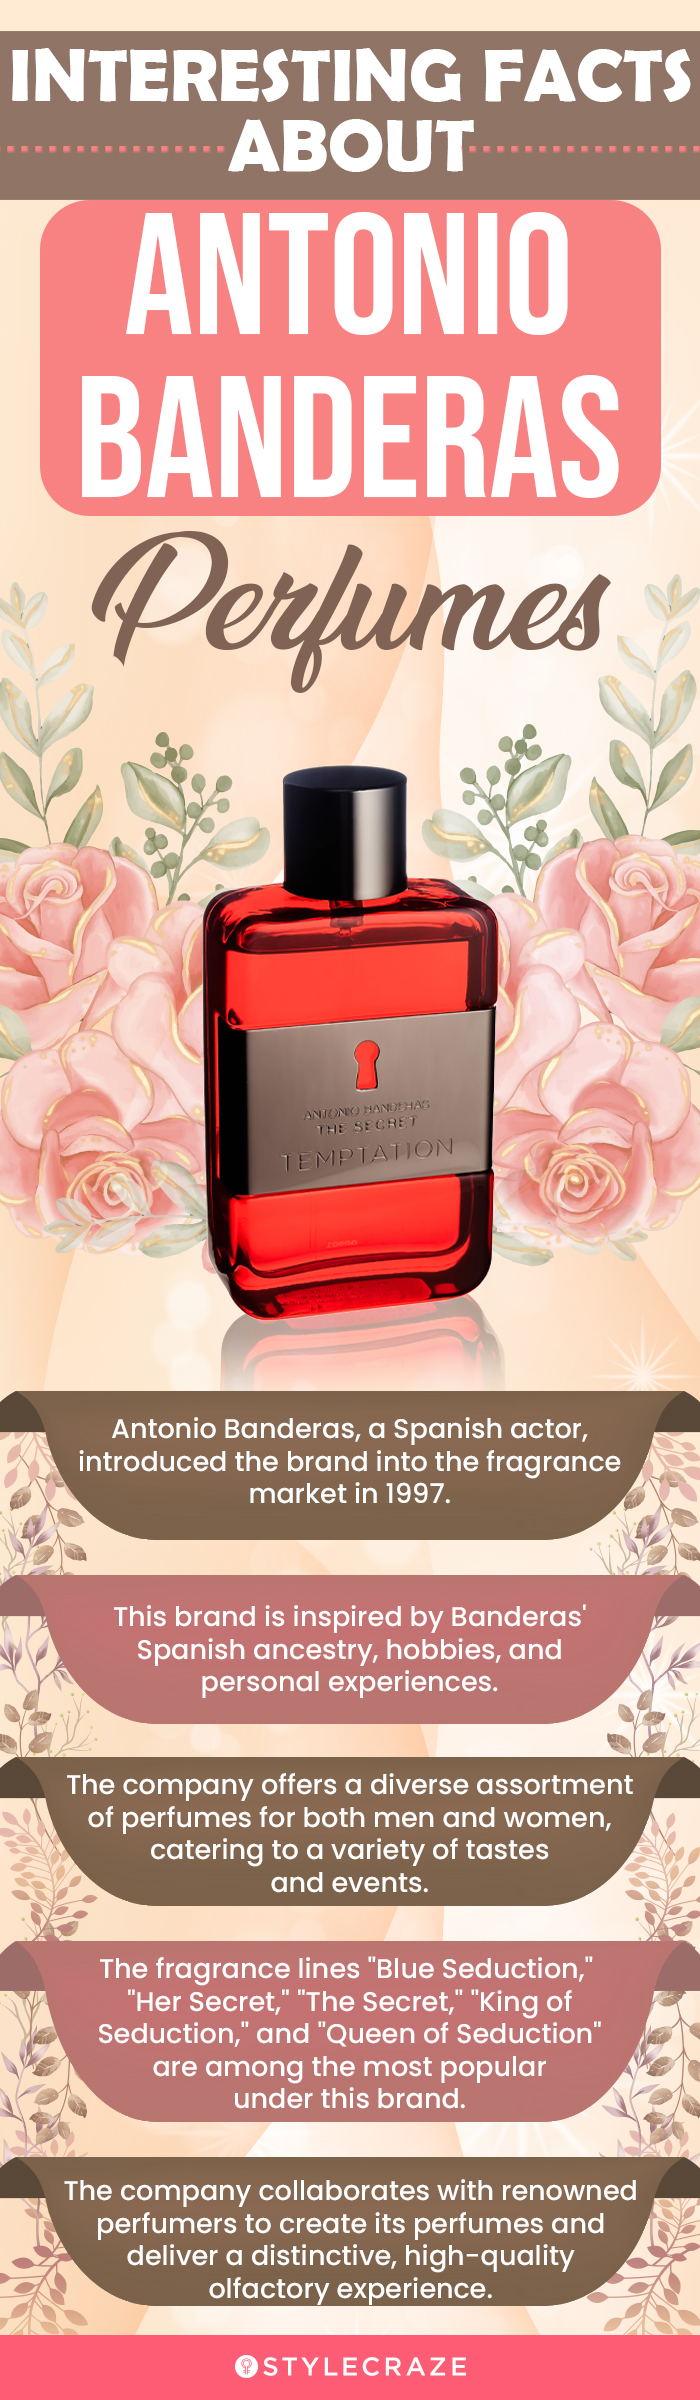 Interesting Facts About Antonio Banderas Perfumes (infographic)